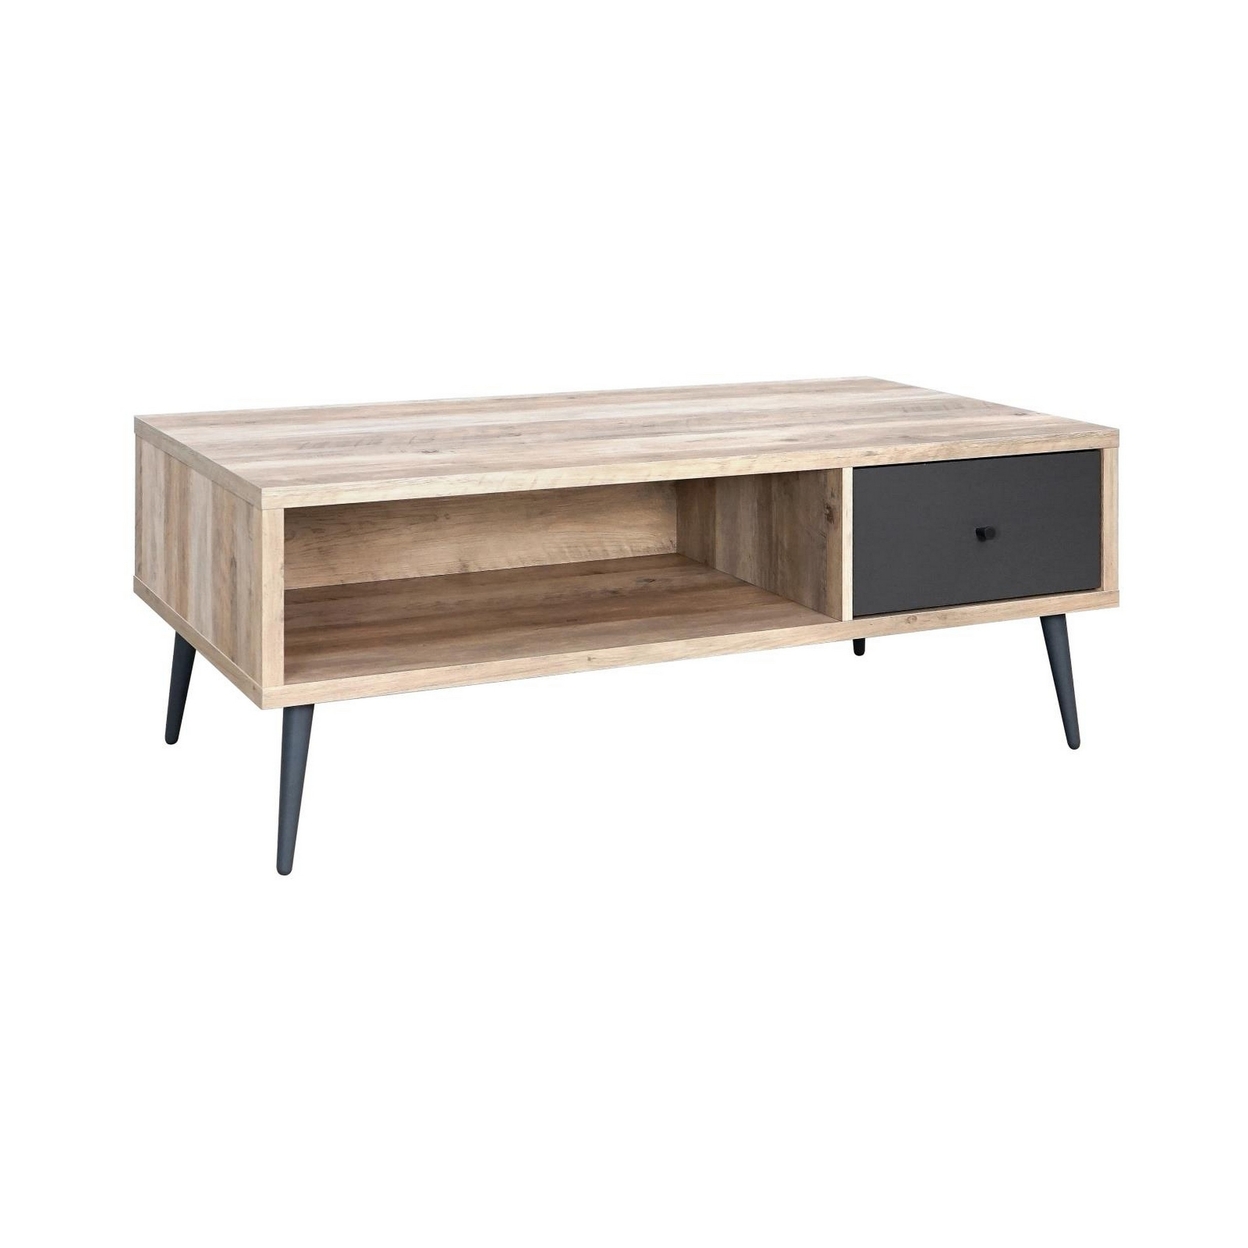 Carly 47 Inch Coffee Table, Tapered Legs, 1 Drawer, Light Brown And Gray - Saltoro Sherpi